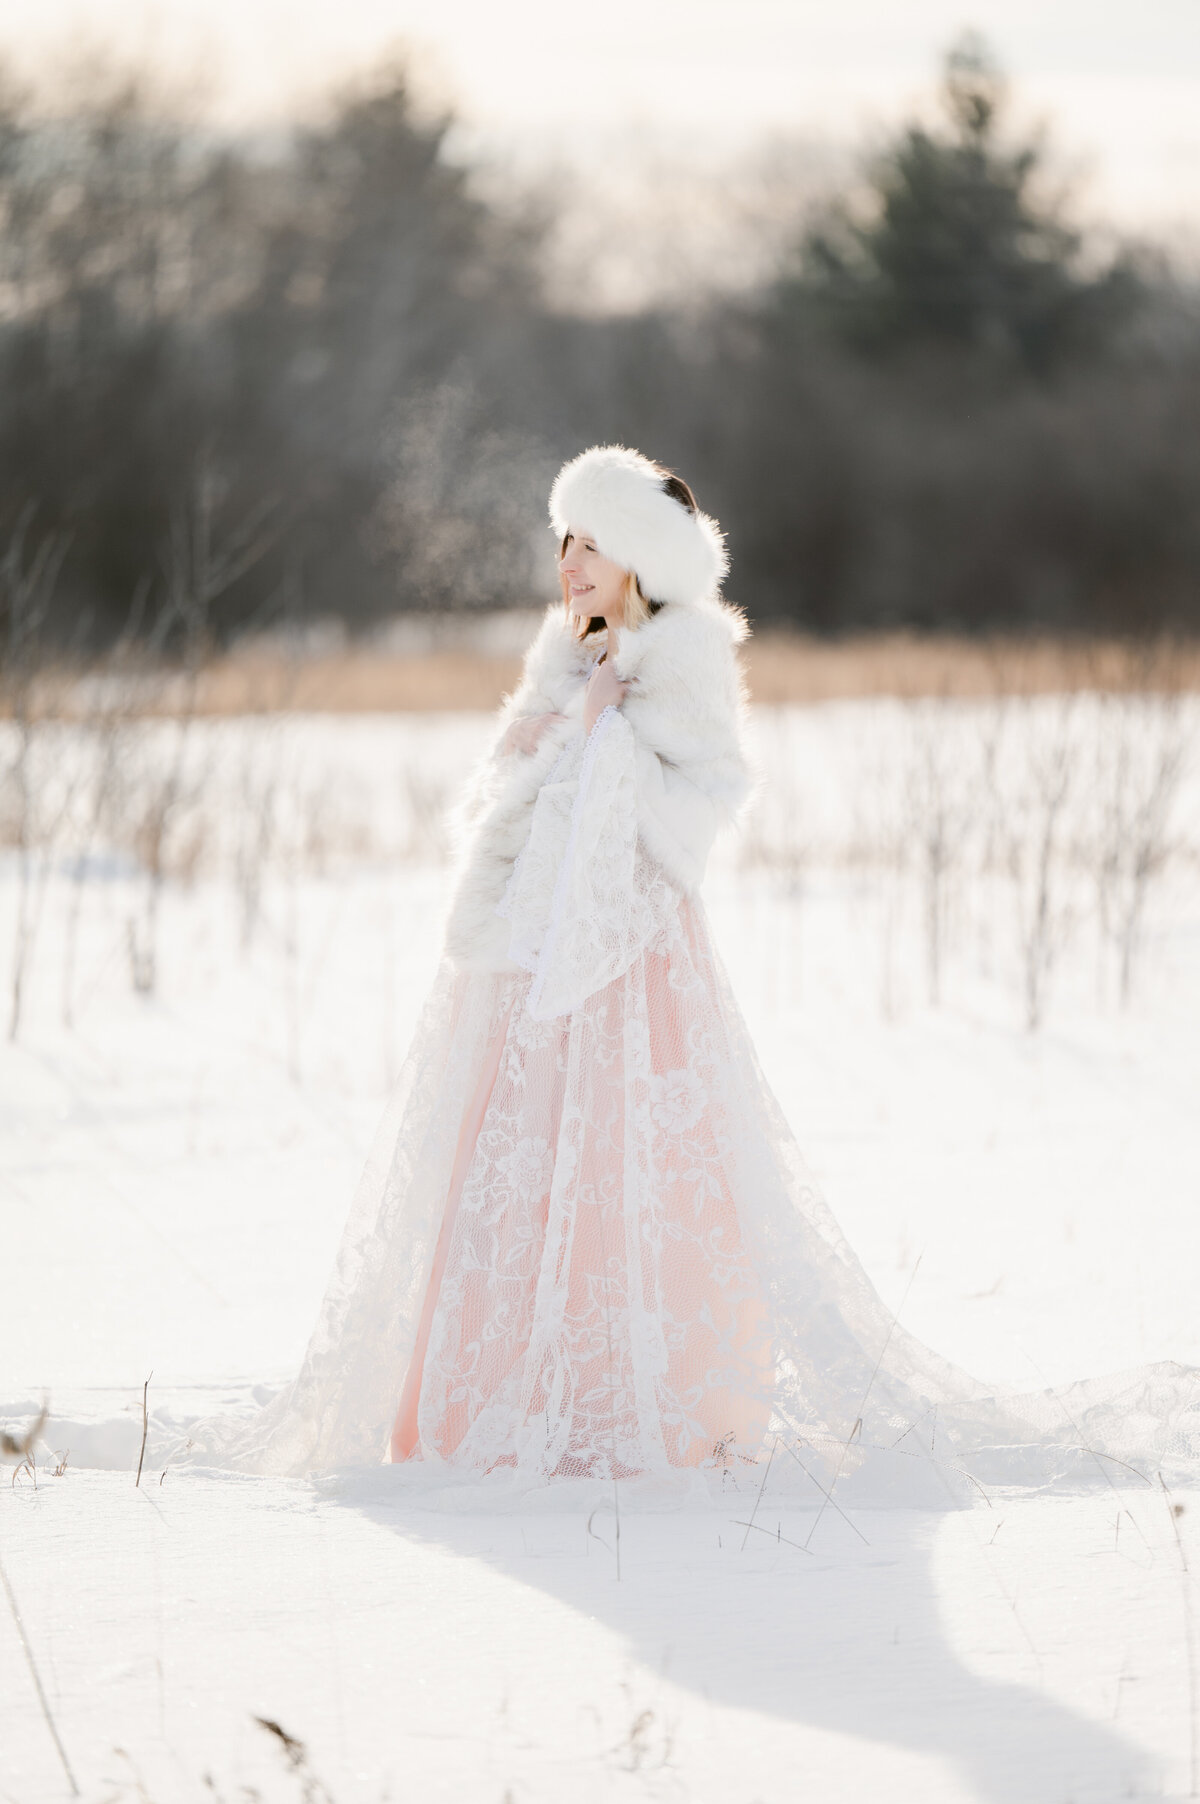 Winter Maternity Session | High Fashion | Styled | Romantic | Intimate | Modest Gowns | slit| Rust | Maternity | Professionally Posed | Photo Session | Pregnancy Photos